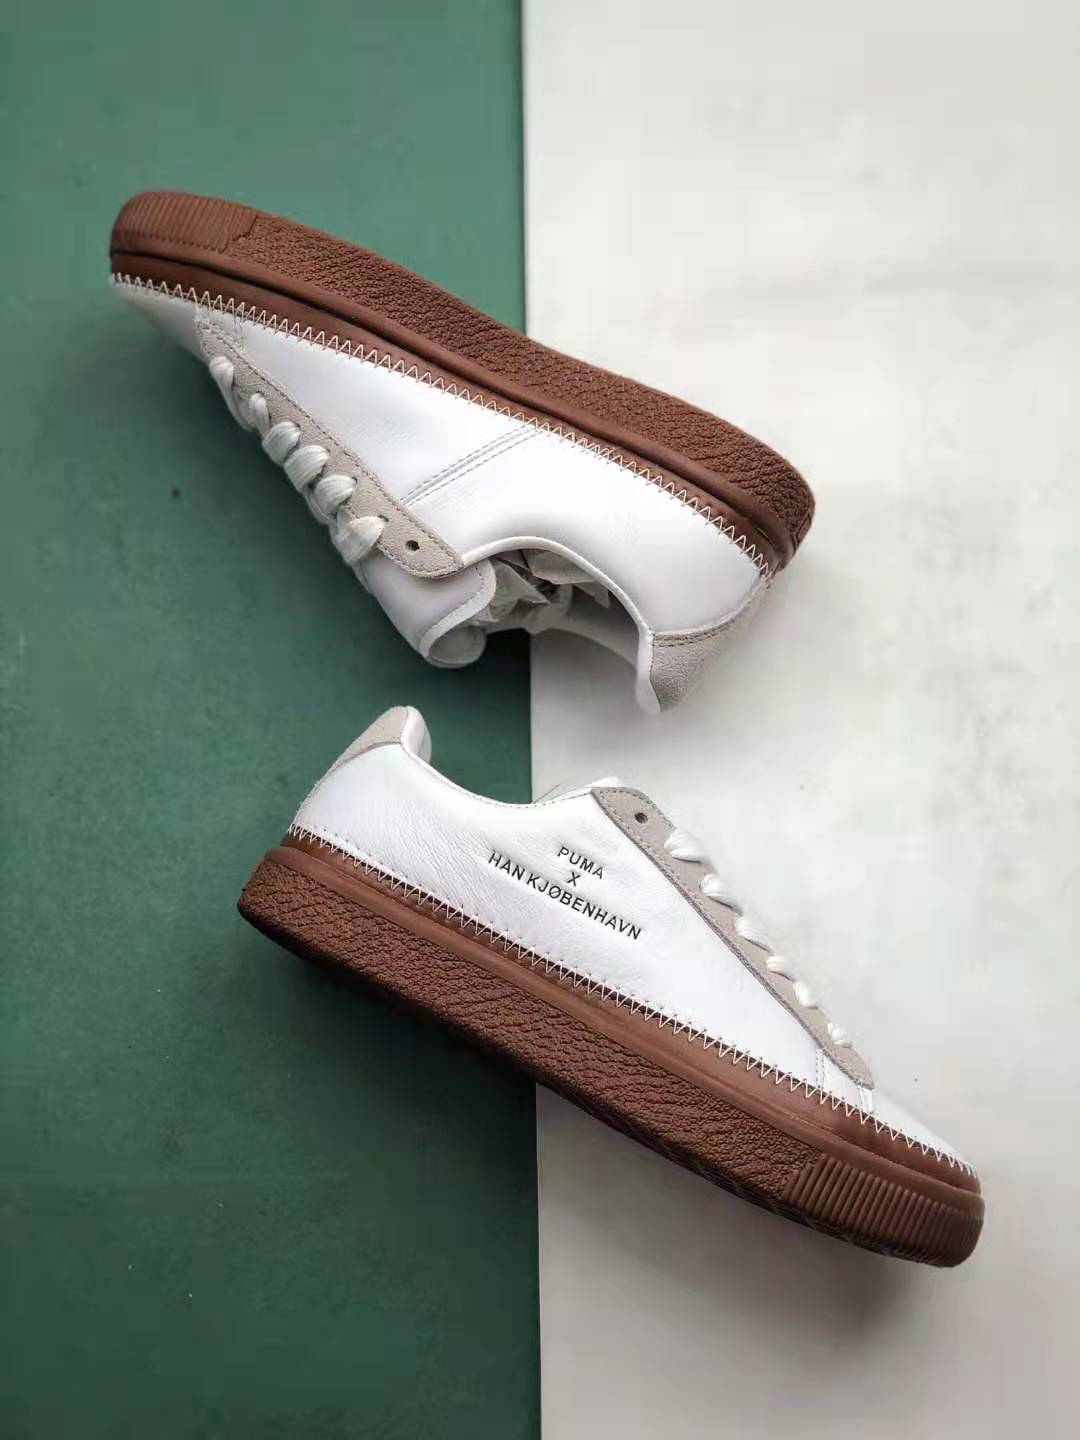 PUMA x Han Kjobenhavn Clyde Stitched Sneakers - Limited Edition